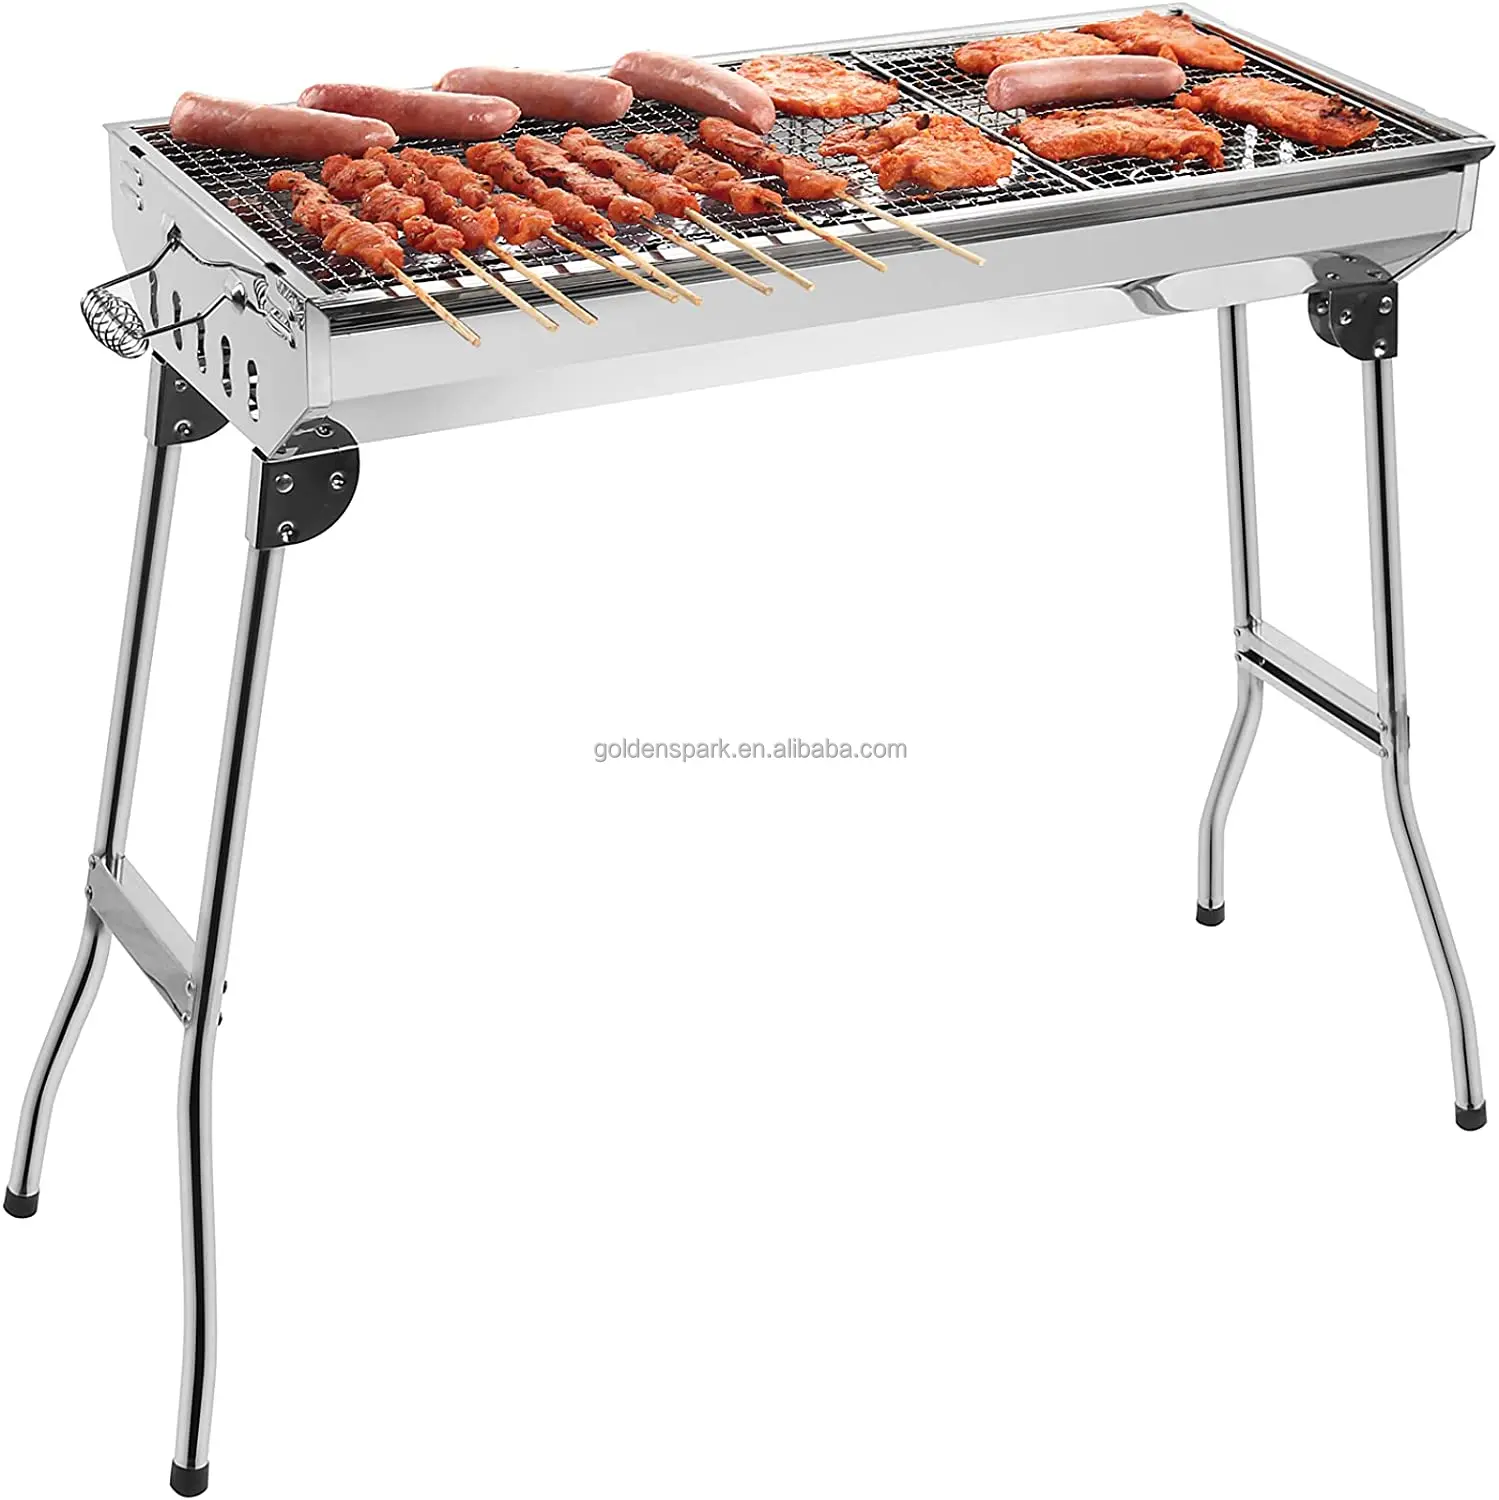 Portable BBQ Grill Stainless Steel Foldable Charcoal Barbecue Grill with Stand Indoor Outdoor 